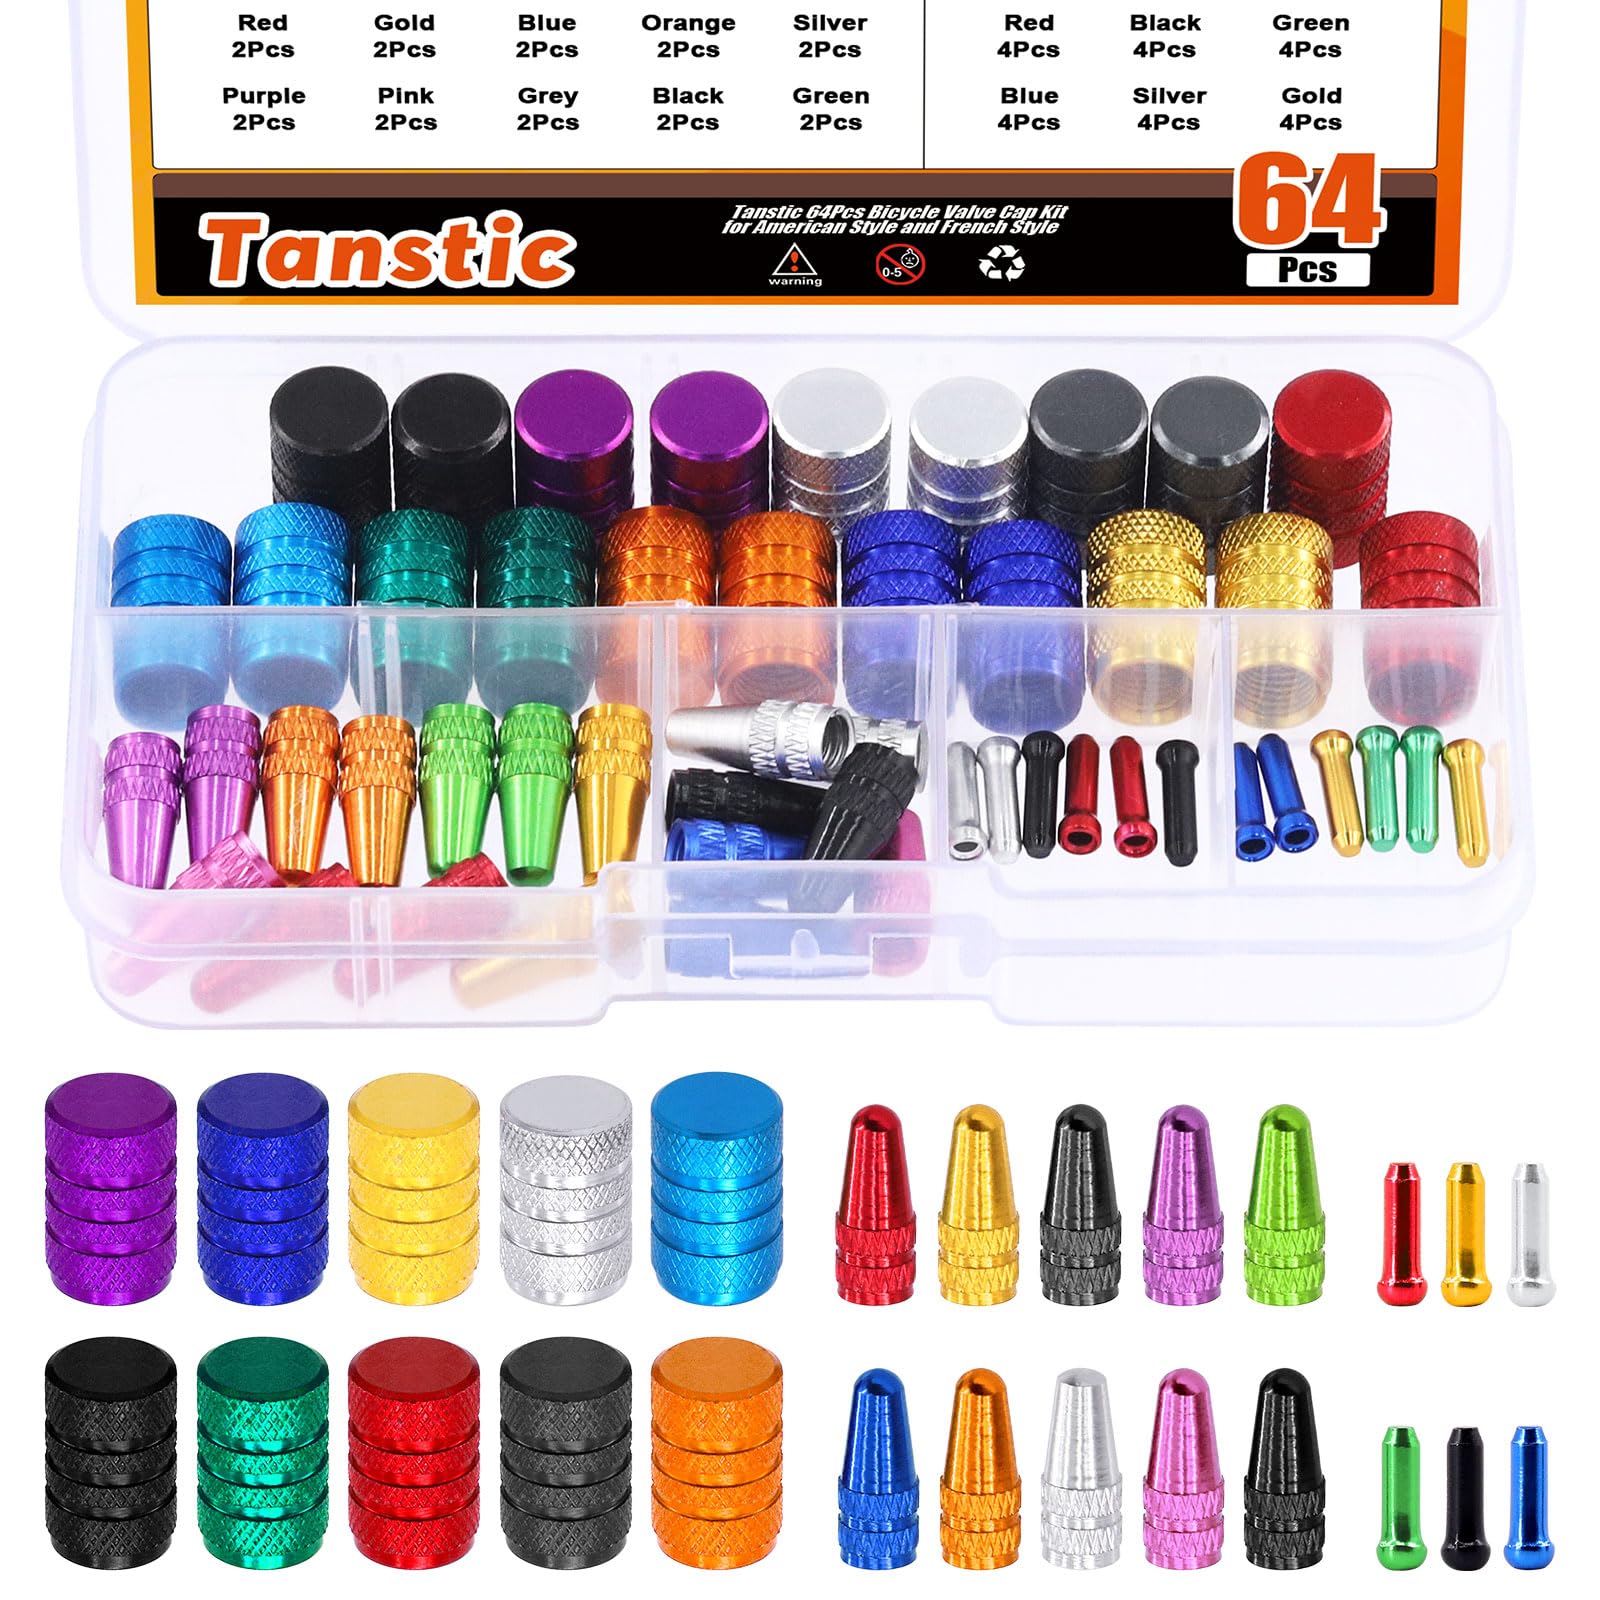 Tanstic 64Pcs Bike Tire Valve Stem Caps with Cable End Caps Kit, 10 Colors French Style & American Style Aluminum Tire Valve Caps Dust Covers, 6 Colors Alloy Cable End Crimps for Bicycle Motorcycle von Tanstic